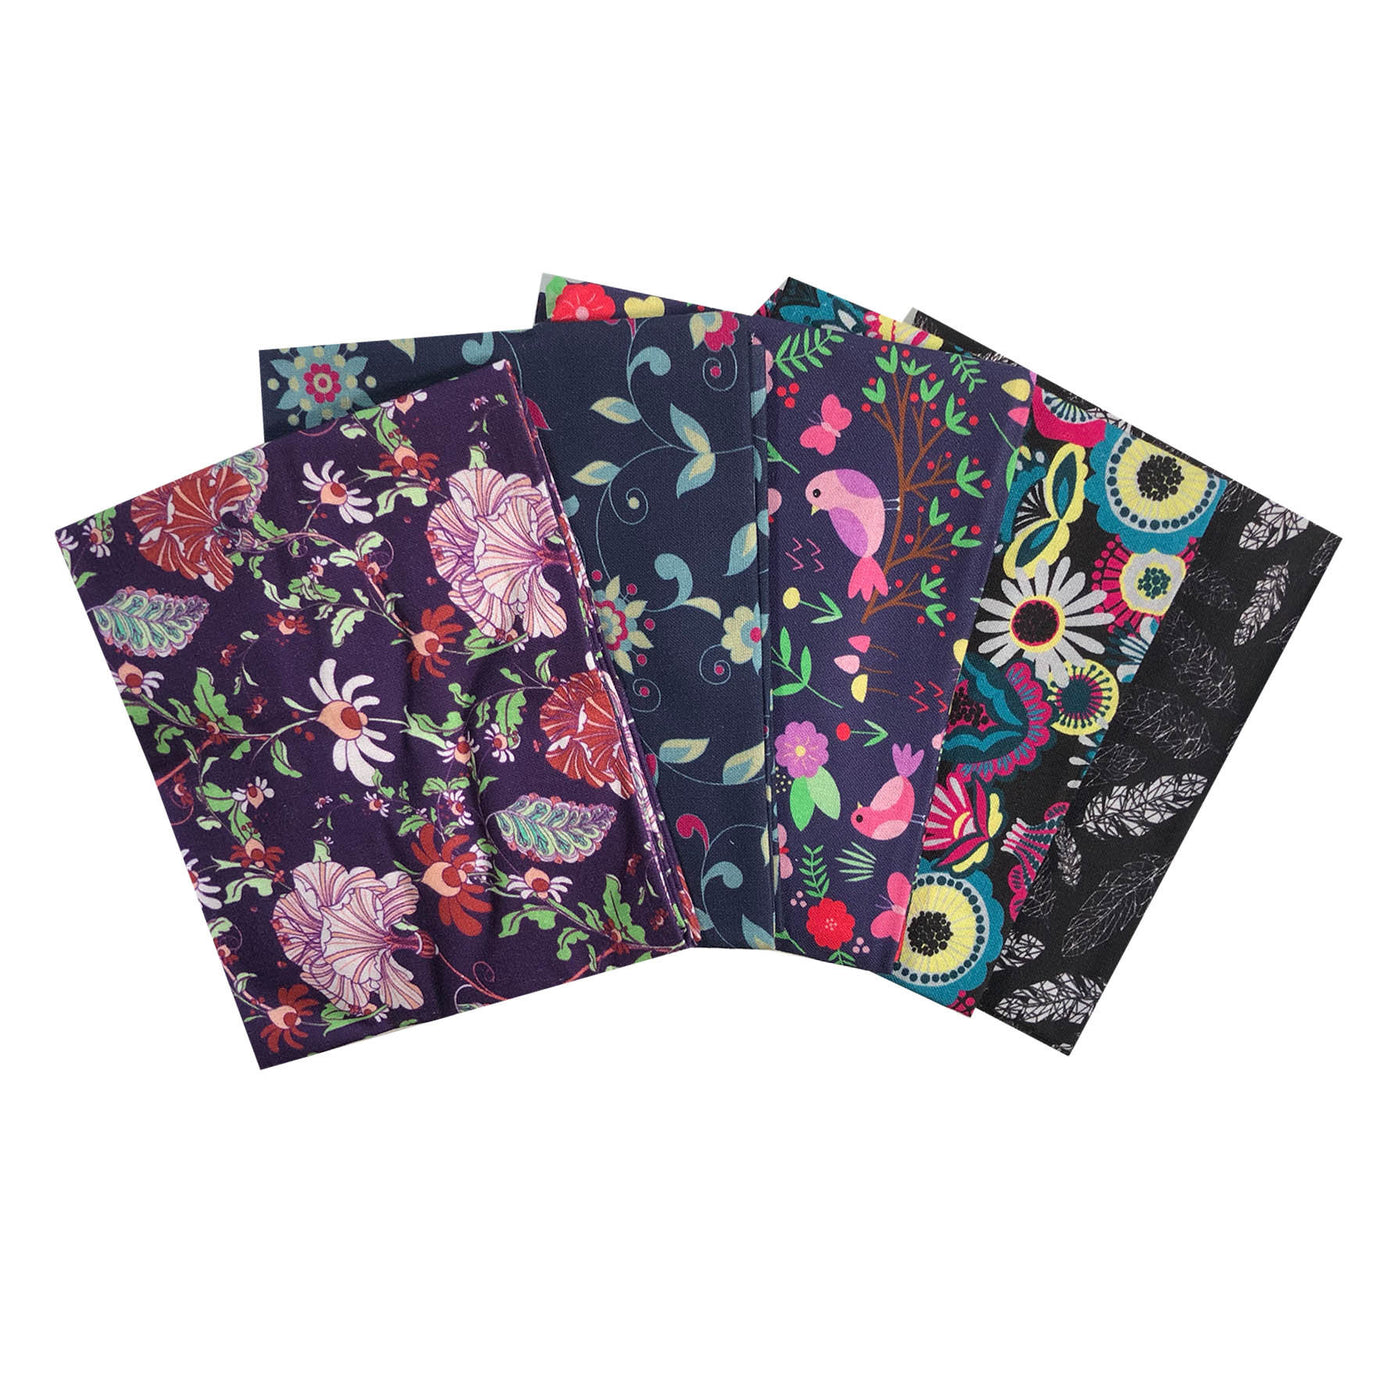 Hip Florals and Birds Patterned fat quarter bundle of 5. Quilting cotton fabric. Craft Cotton Company. Dark navy blue and purple.